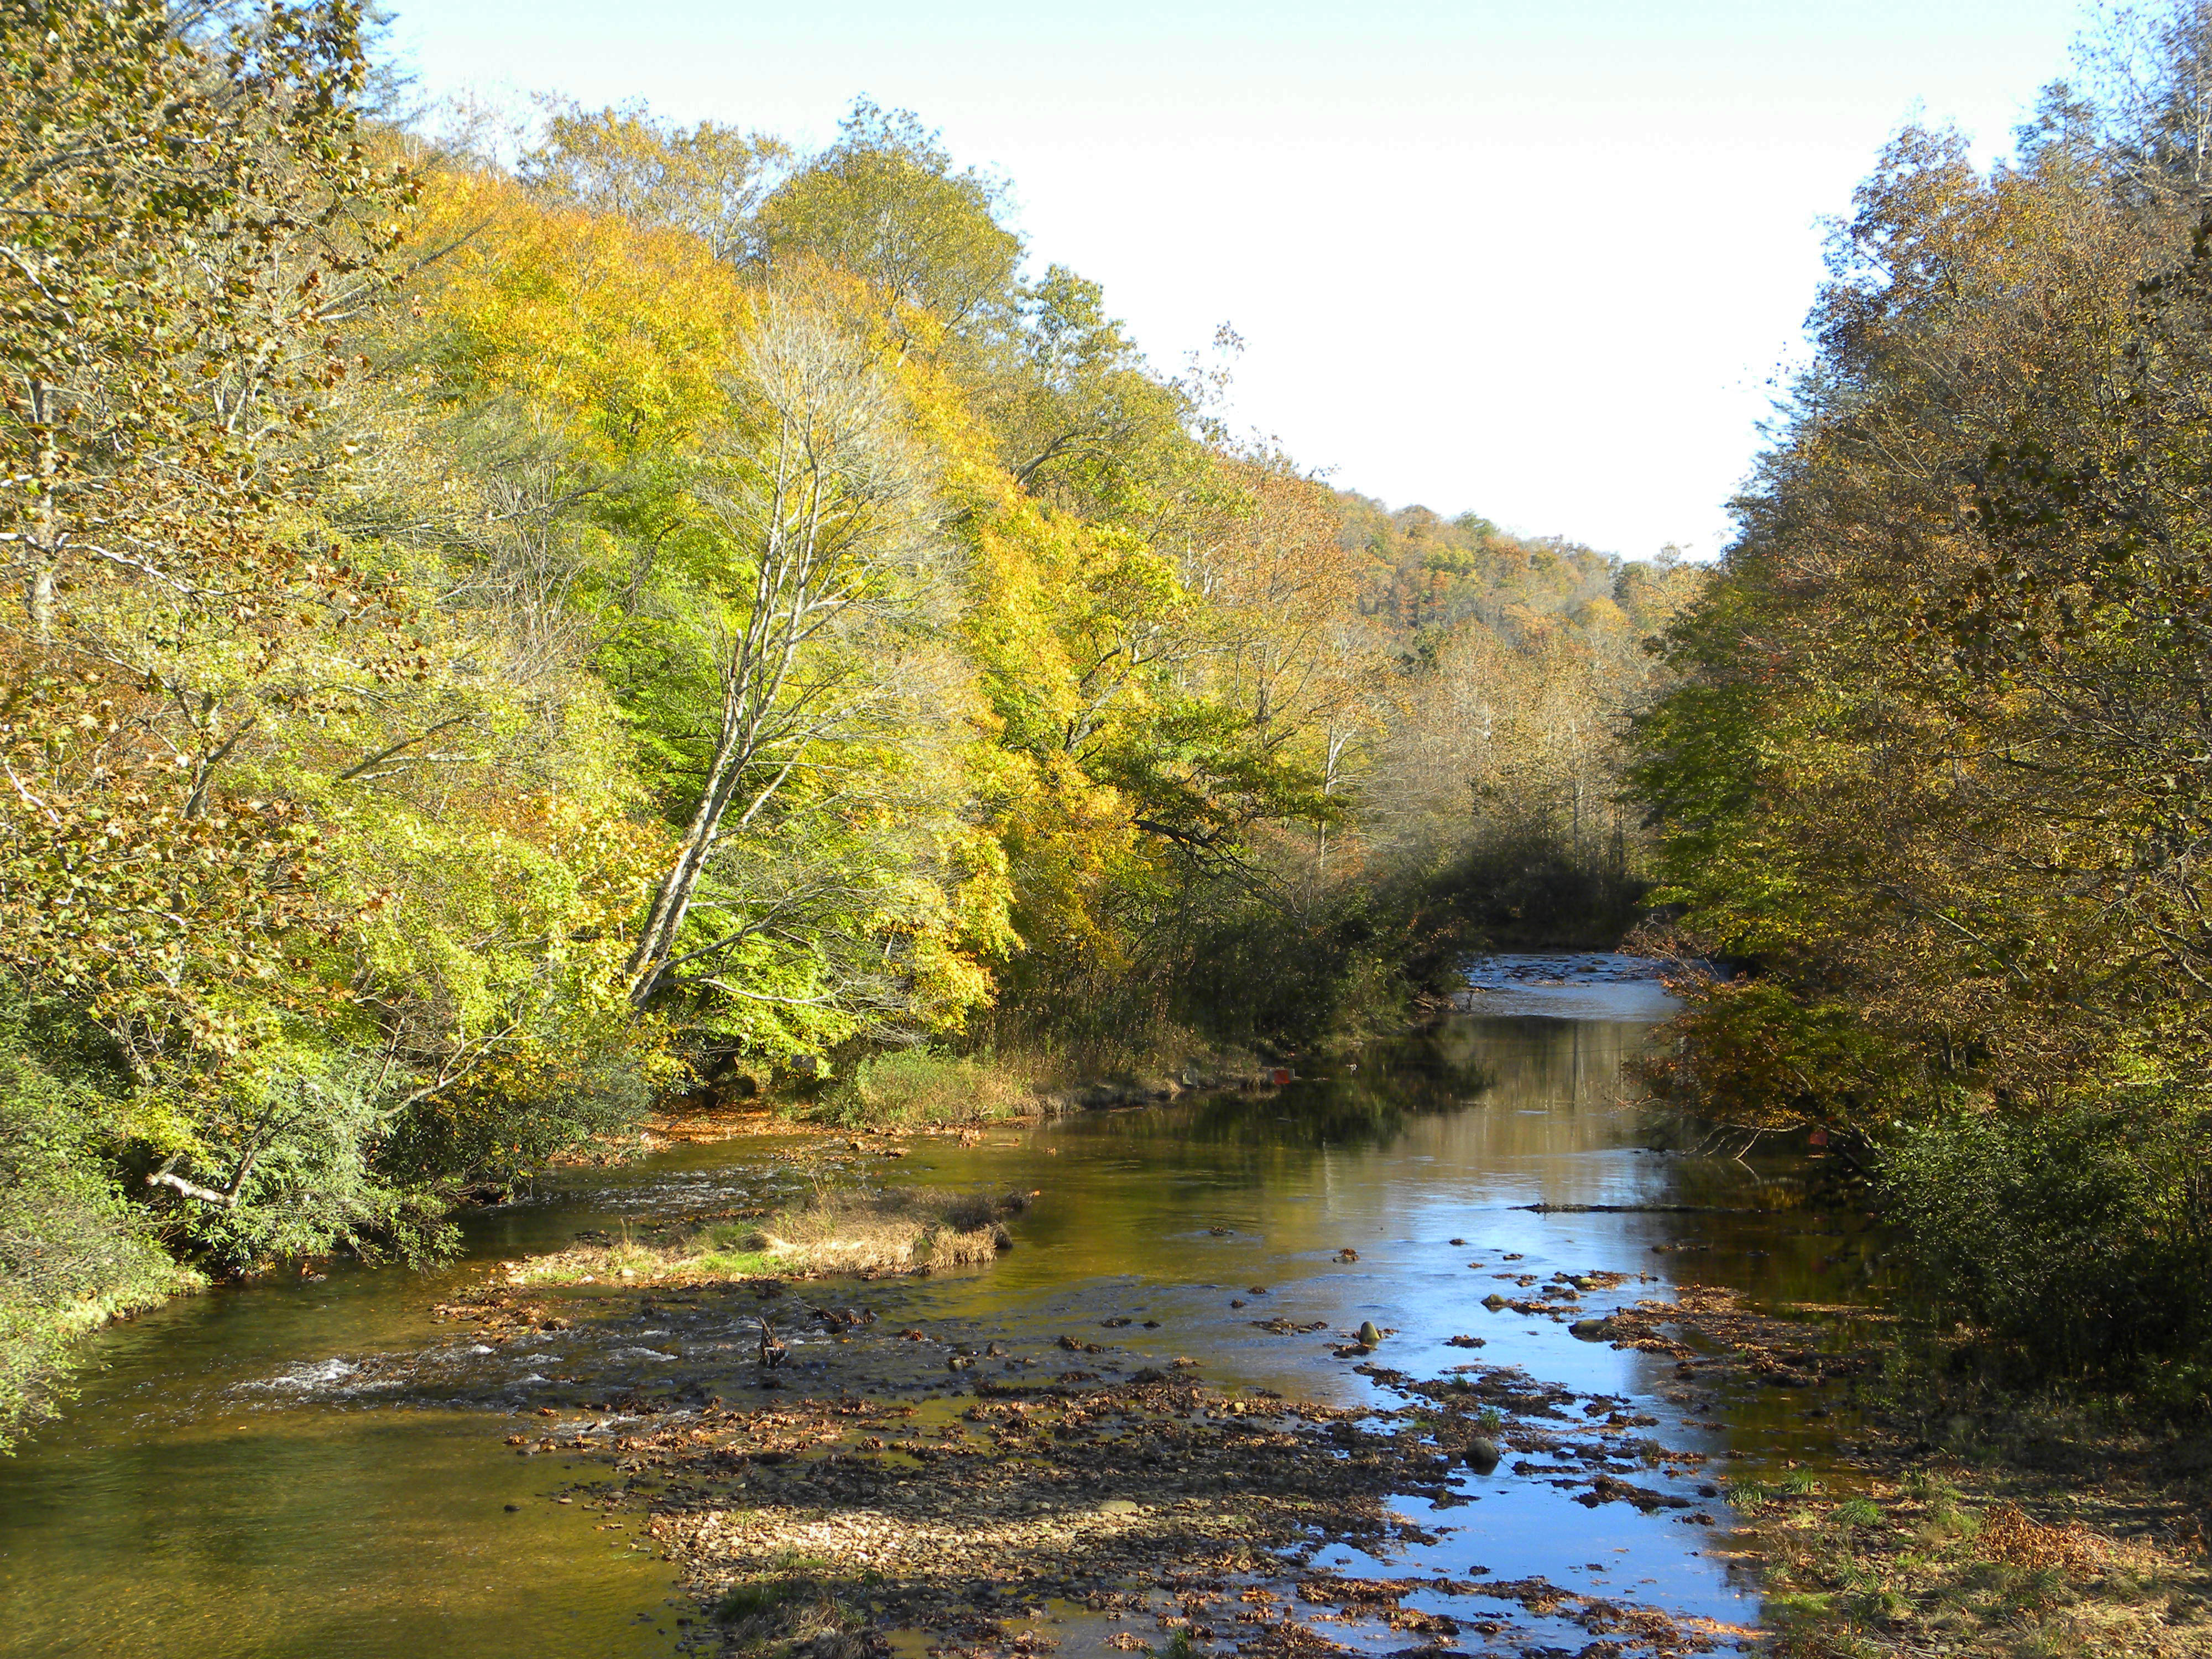 The South Toe River